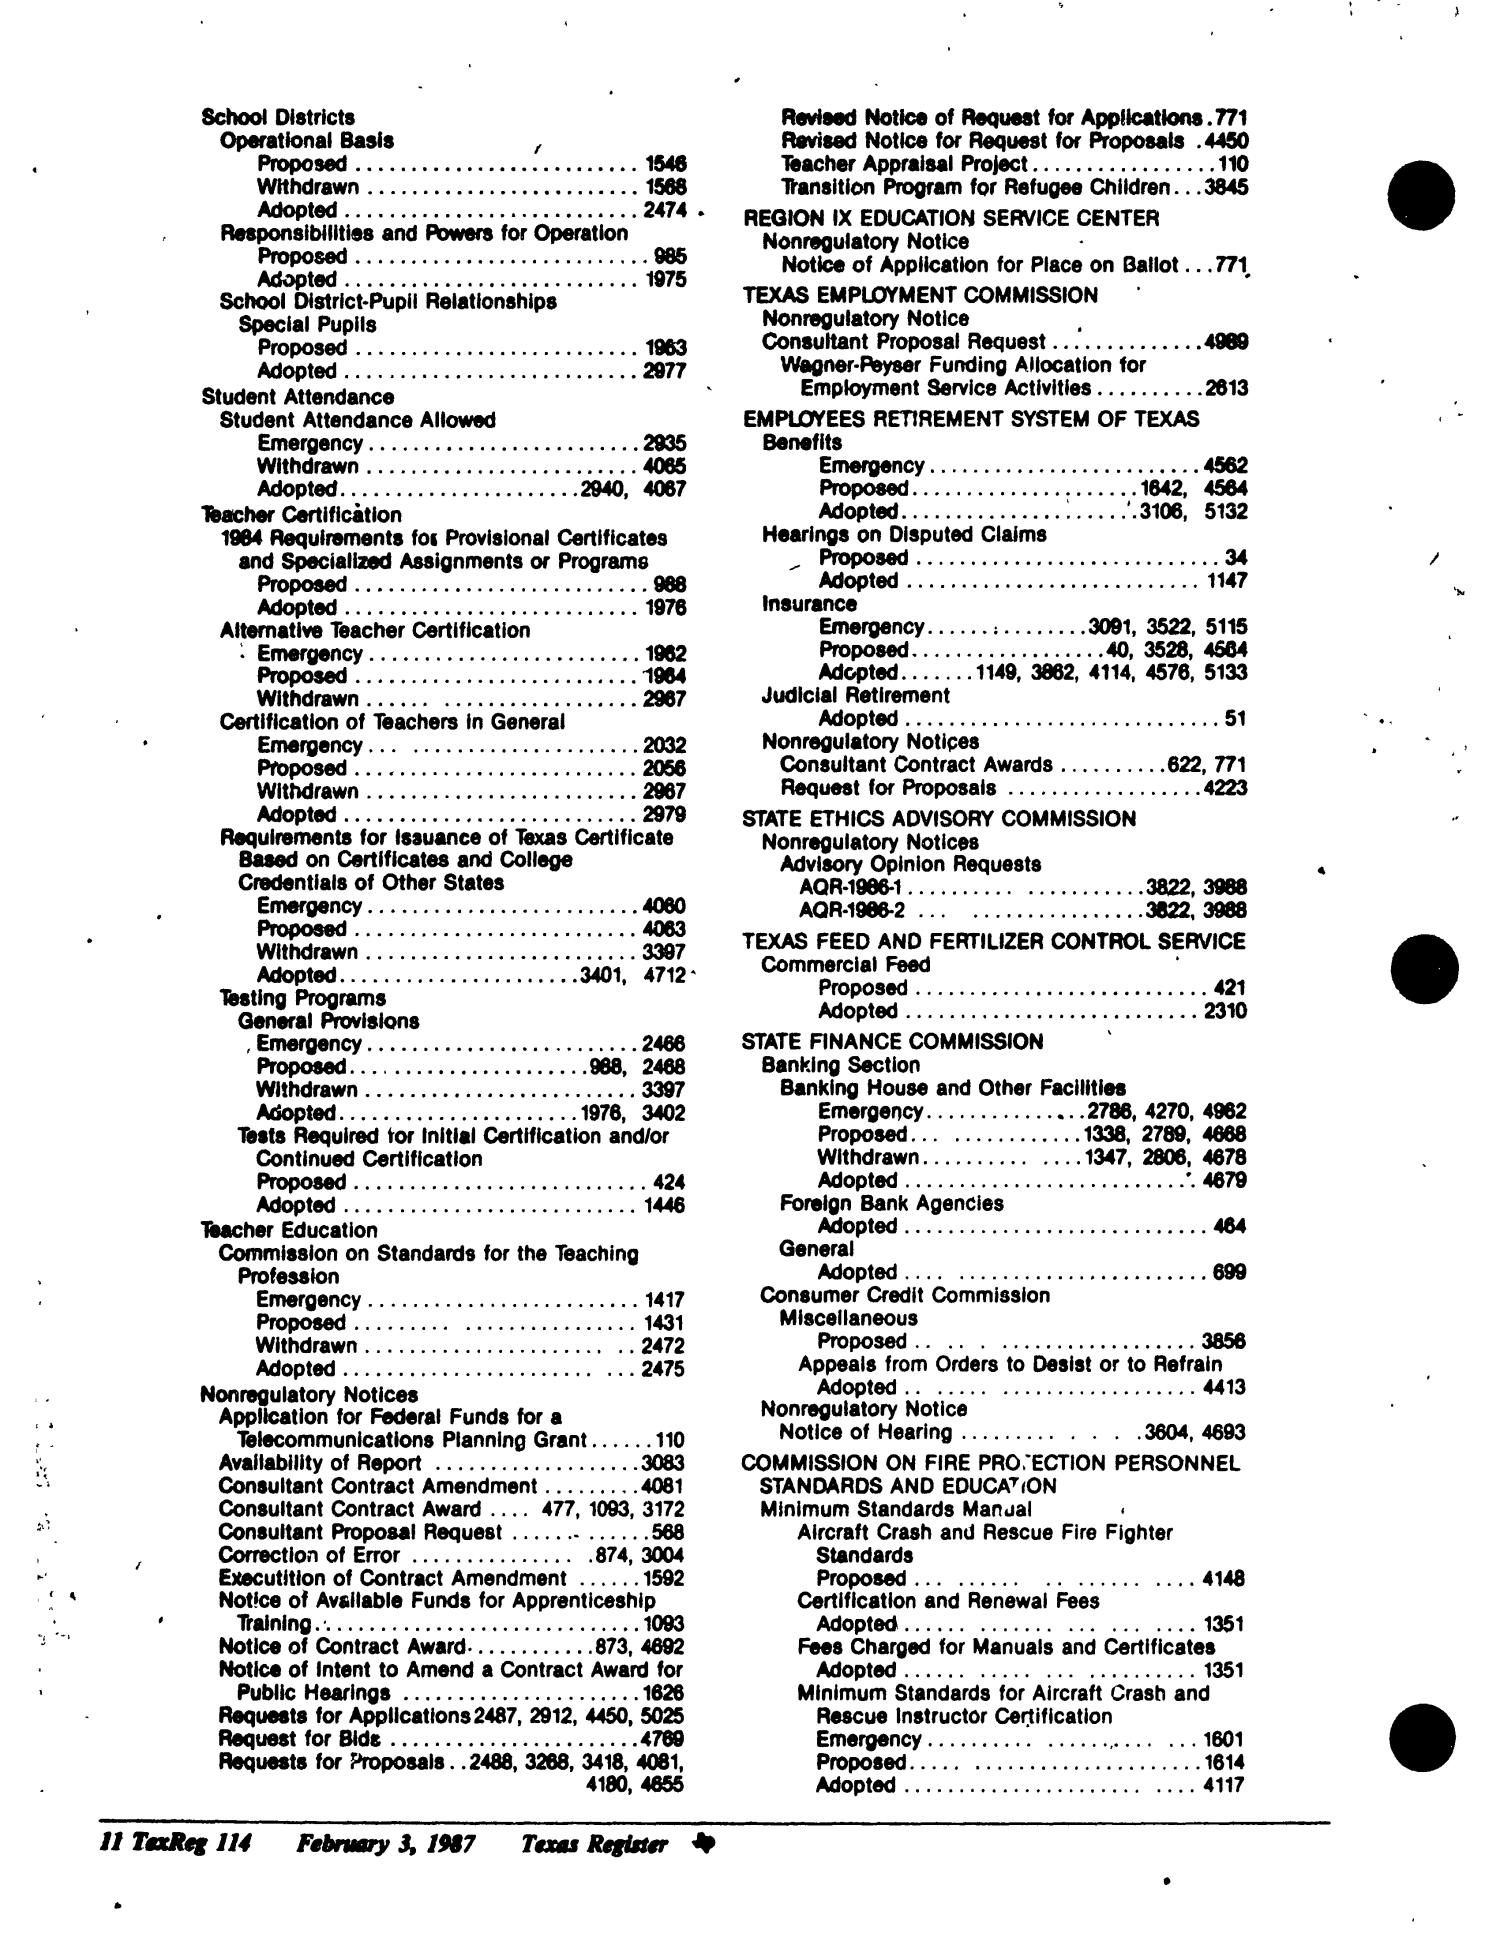 Texas Register: Annual Index January - December 1986, Volume 11 Numbers [1-96] - pages 104-157, February 3, 1987
                                                
                                                    114
                                                